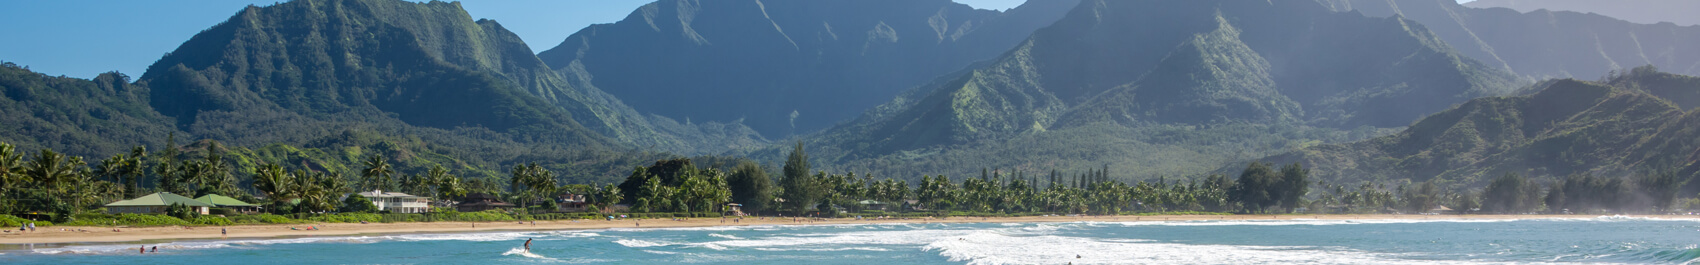 Shoreline at a beach along Kauai's North Shore with a white house to the left and mountains in the background